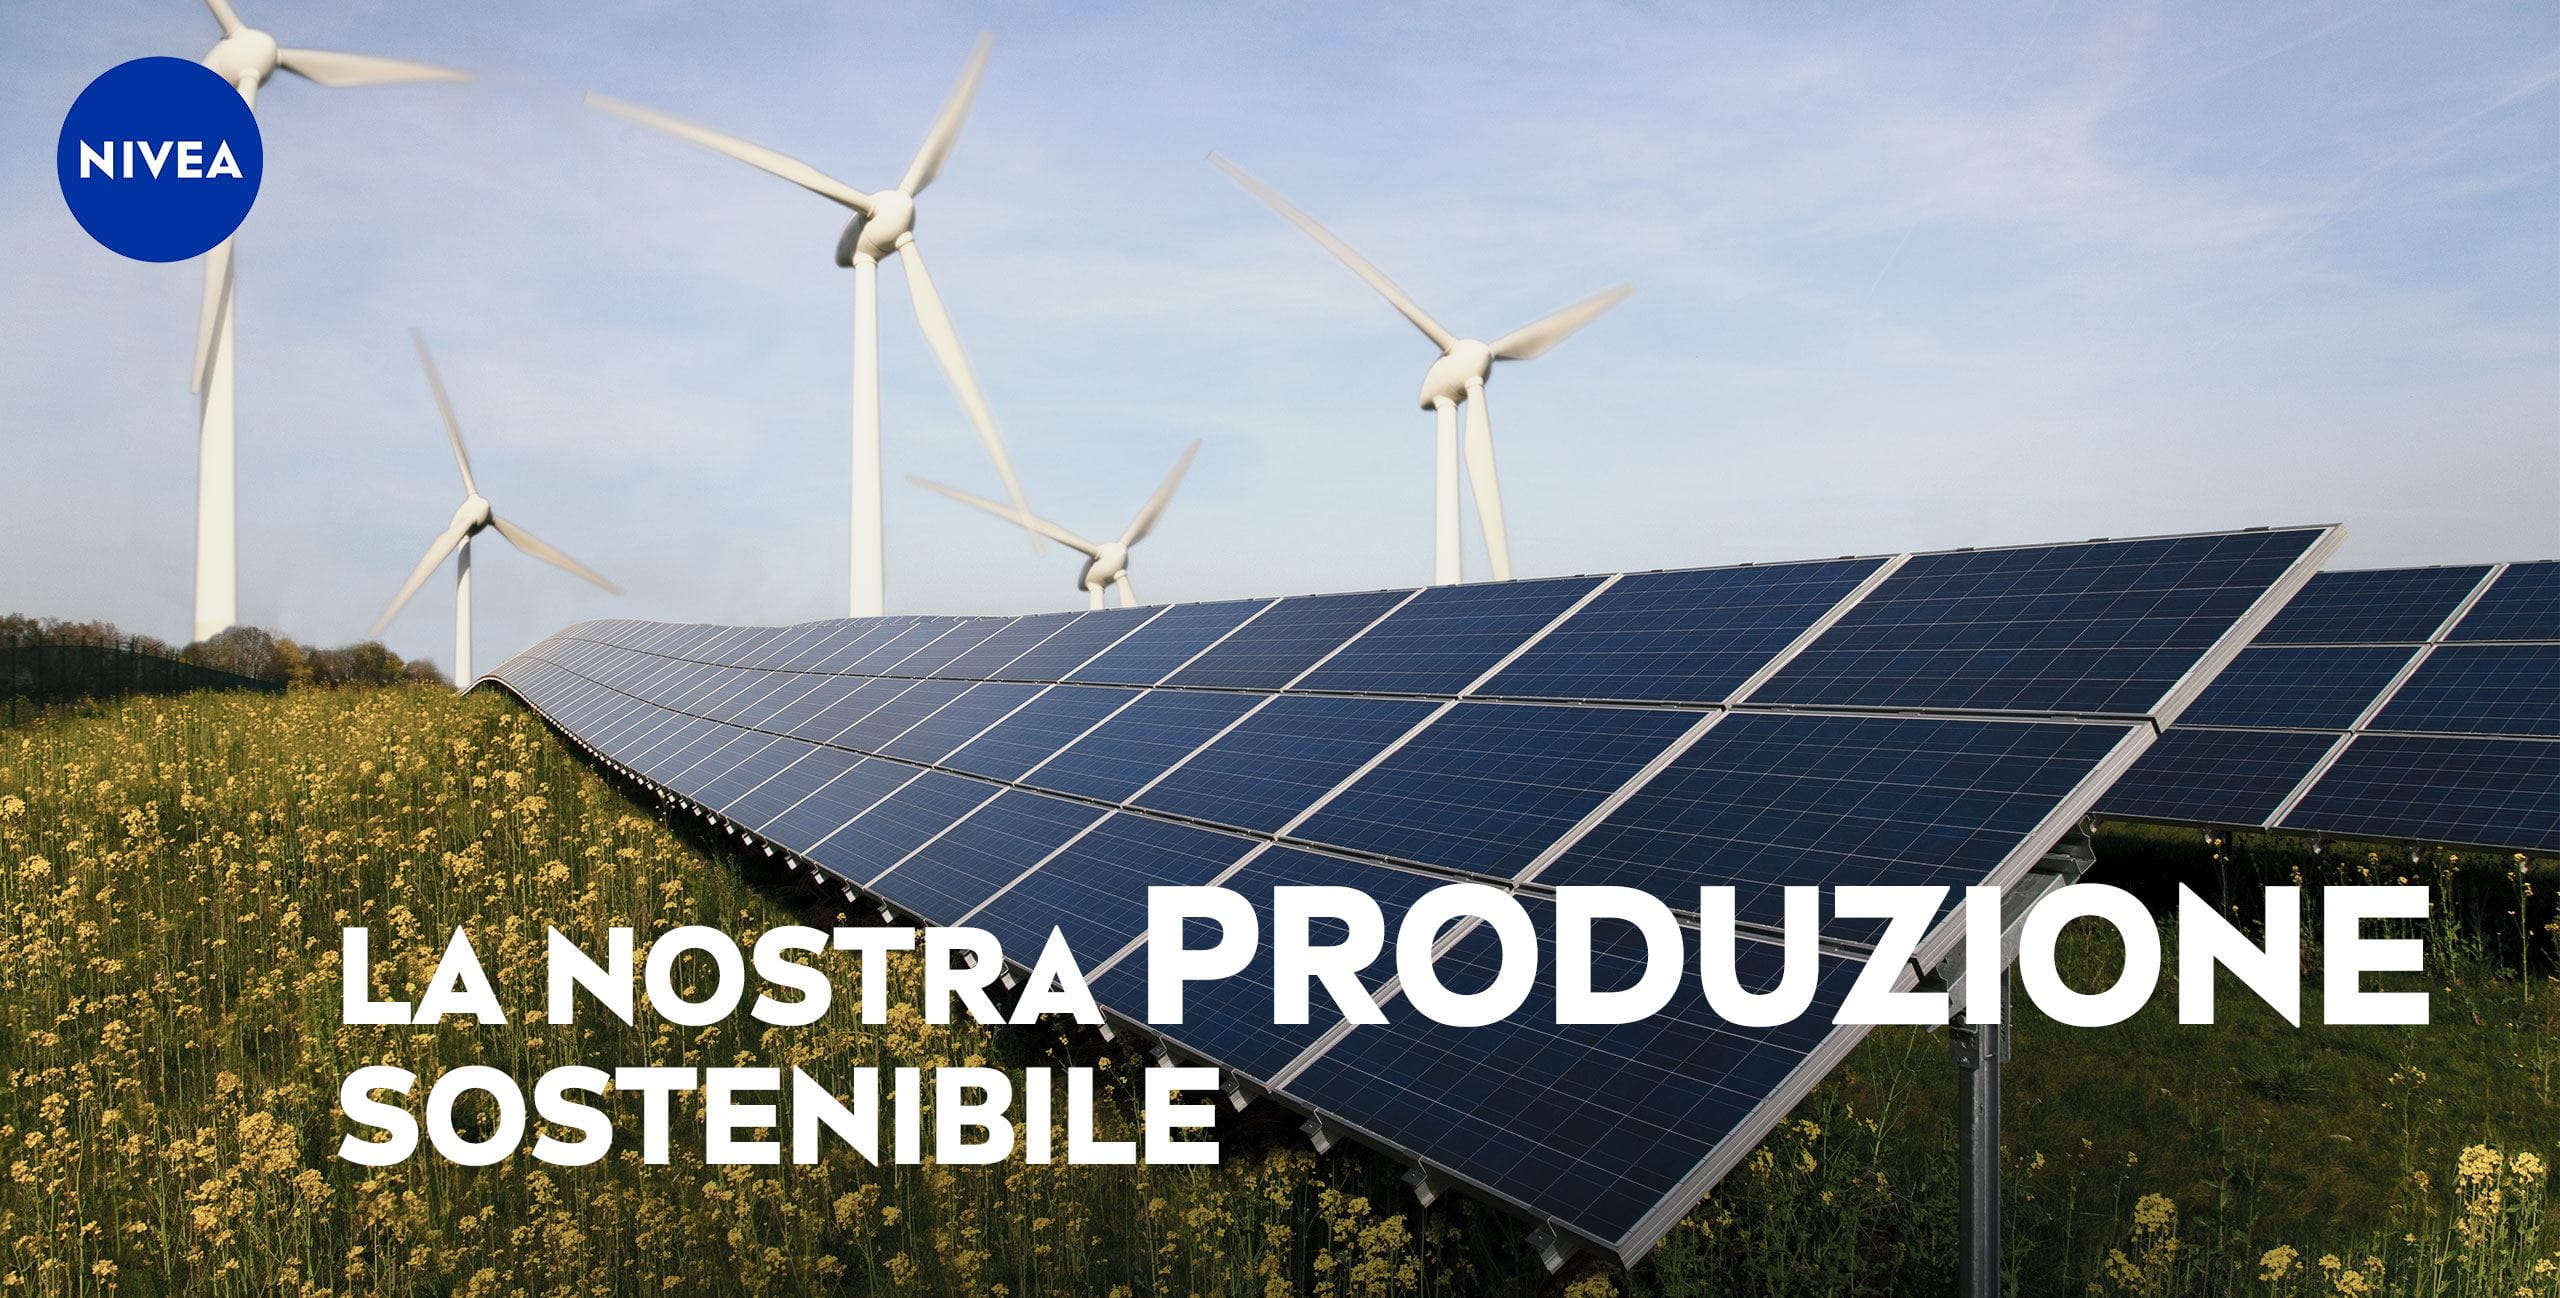 sustainable production